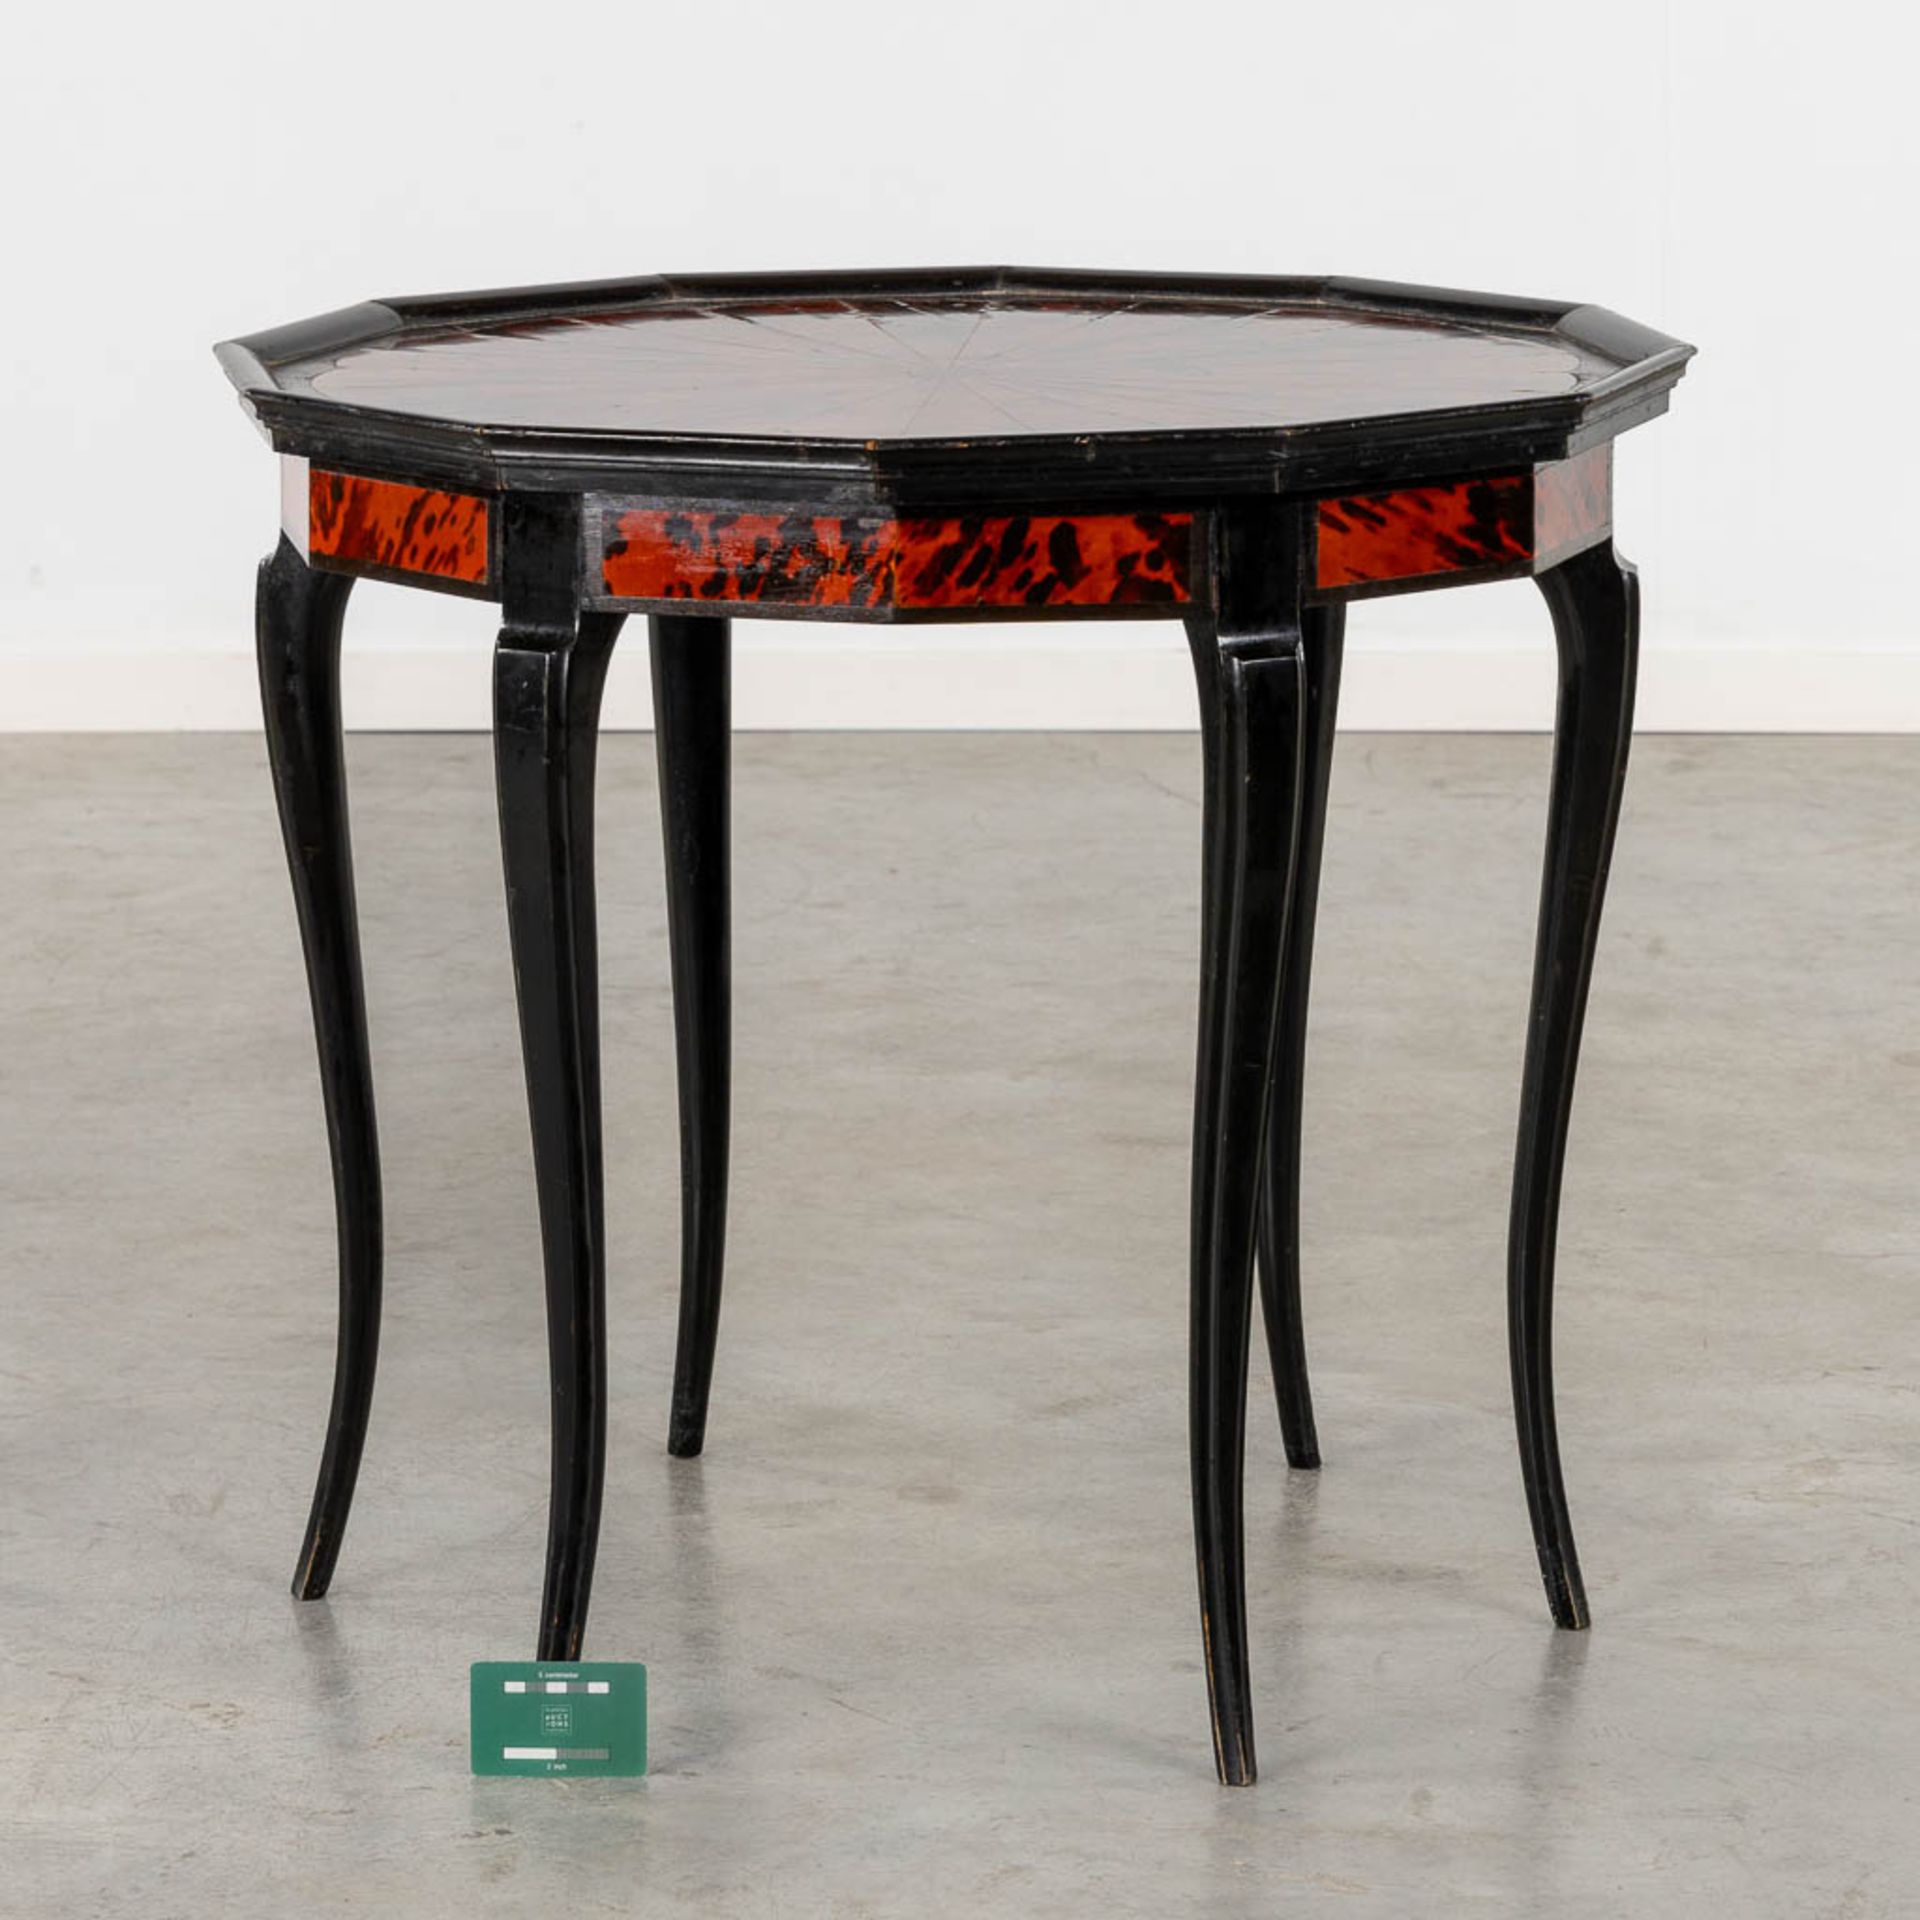 Maison Franck, Antwerp, an octagonal side table, tortoise shell and ebonised wood. (H:65 x D:72 cm) - Image 2 of 8